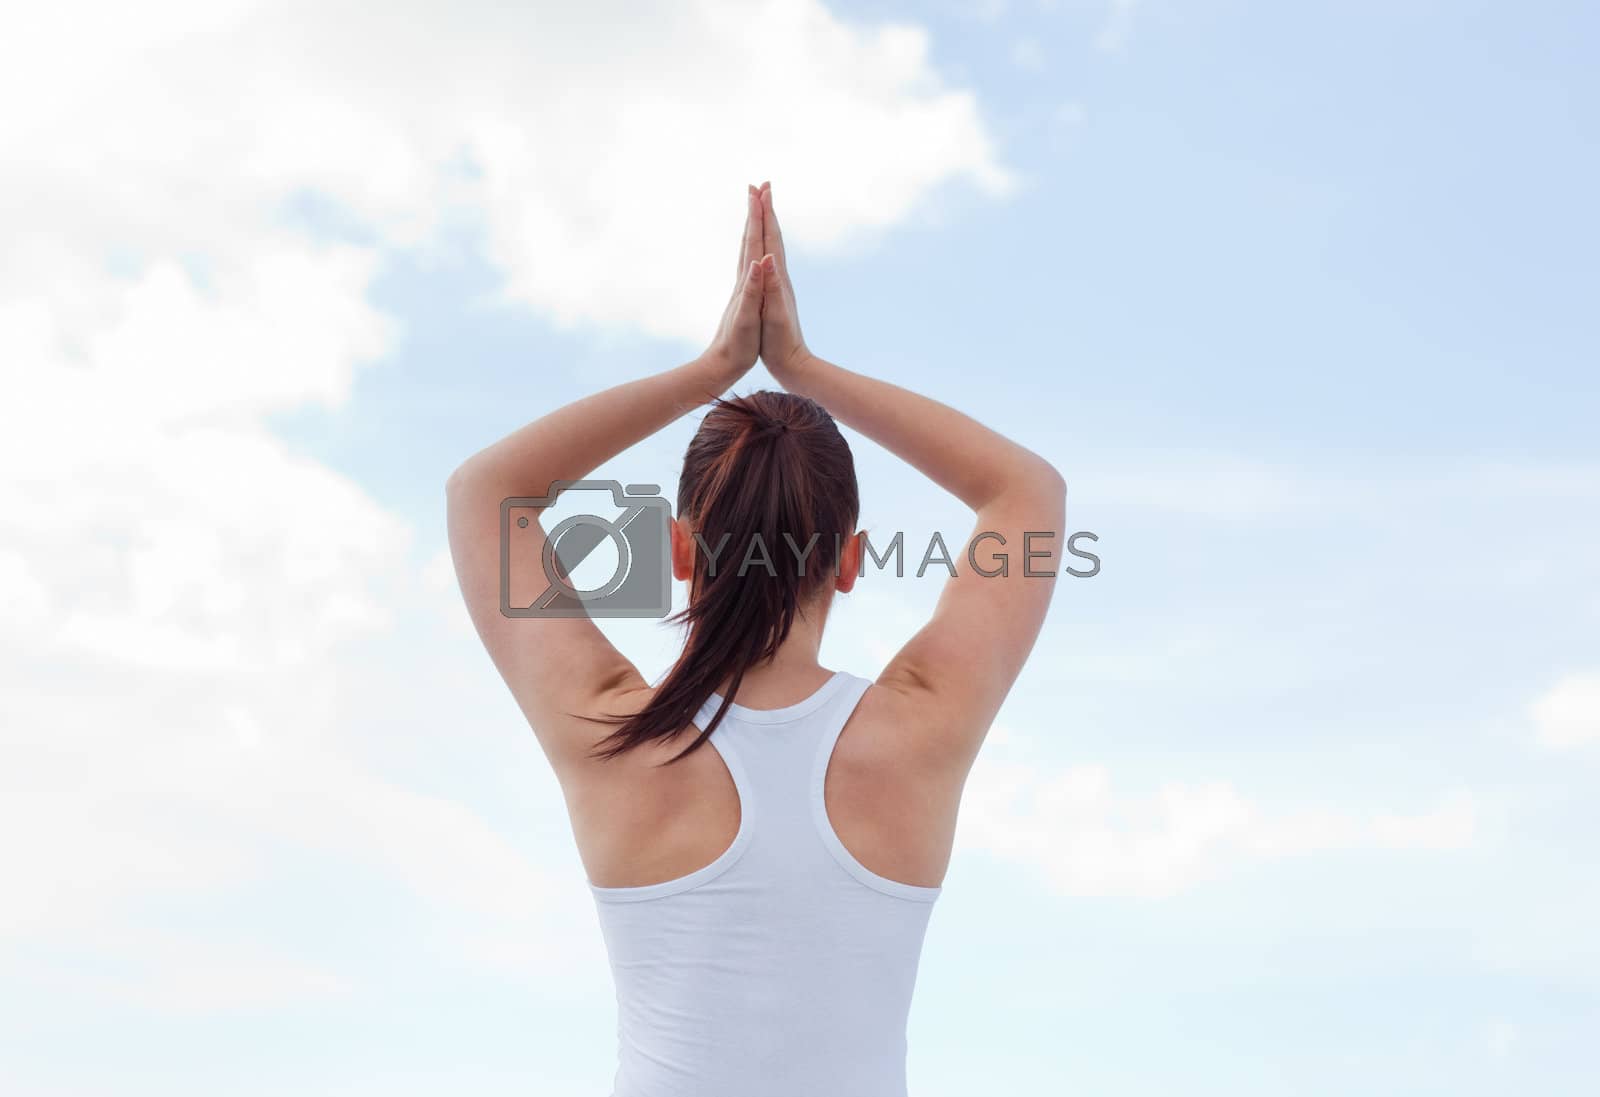 Royalty free image of Young attractive woman doing yoga  by Wavebreakmedia